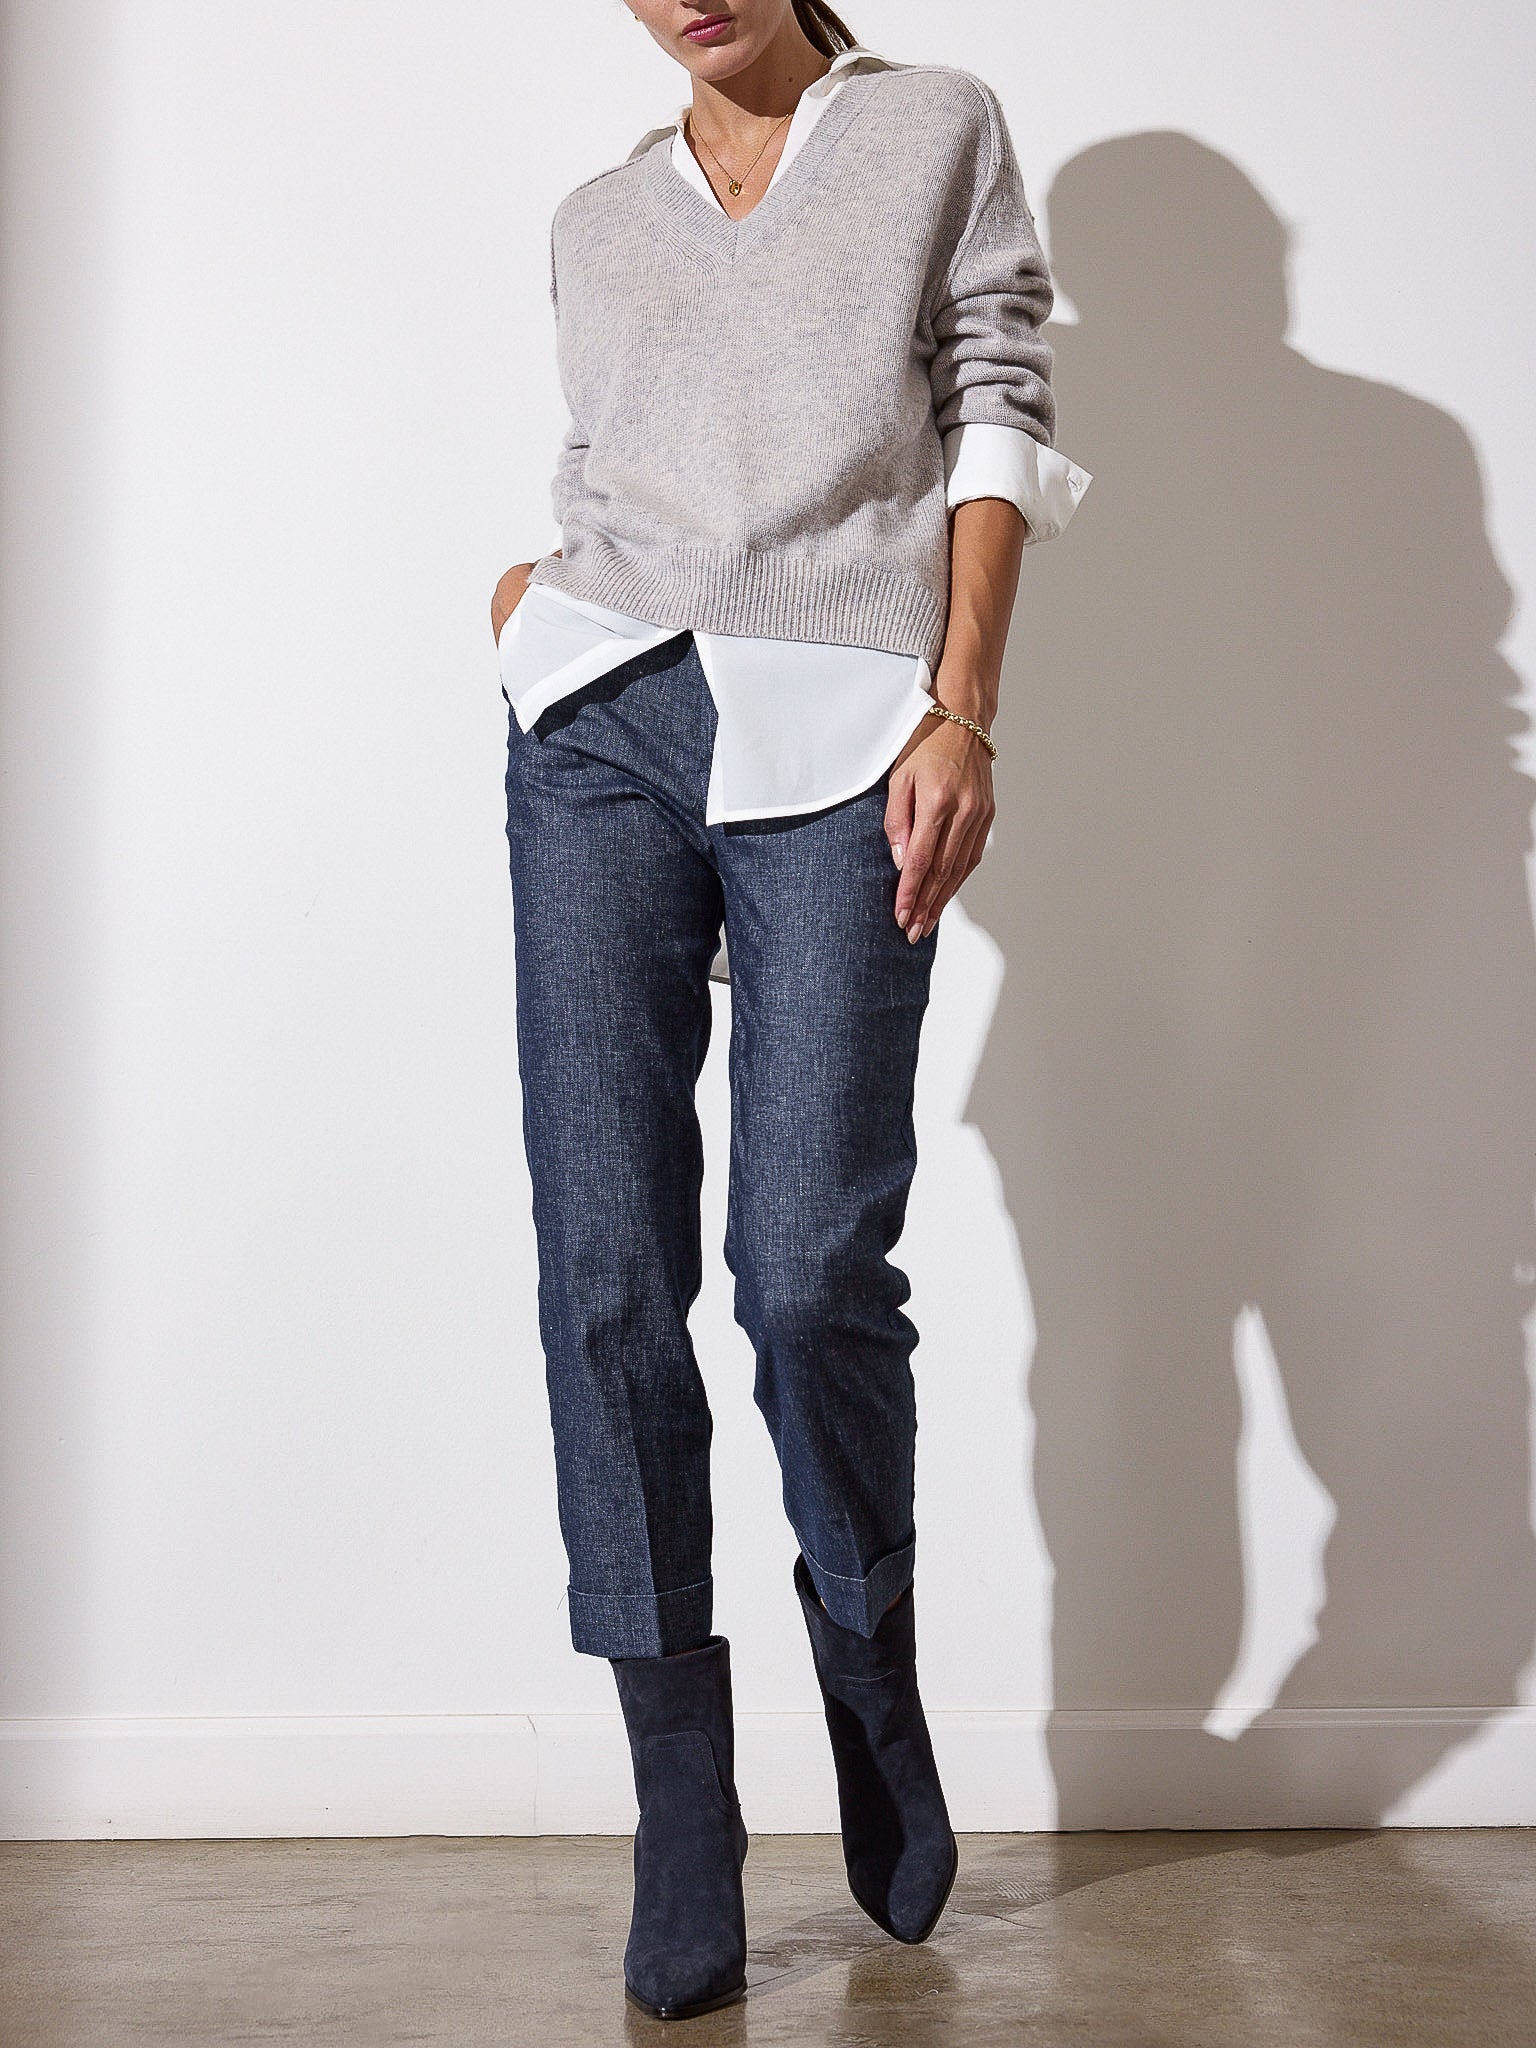 Looker ligth light grey layered V-neck sweater full view